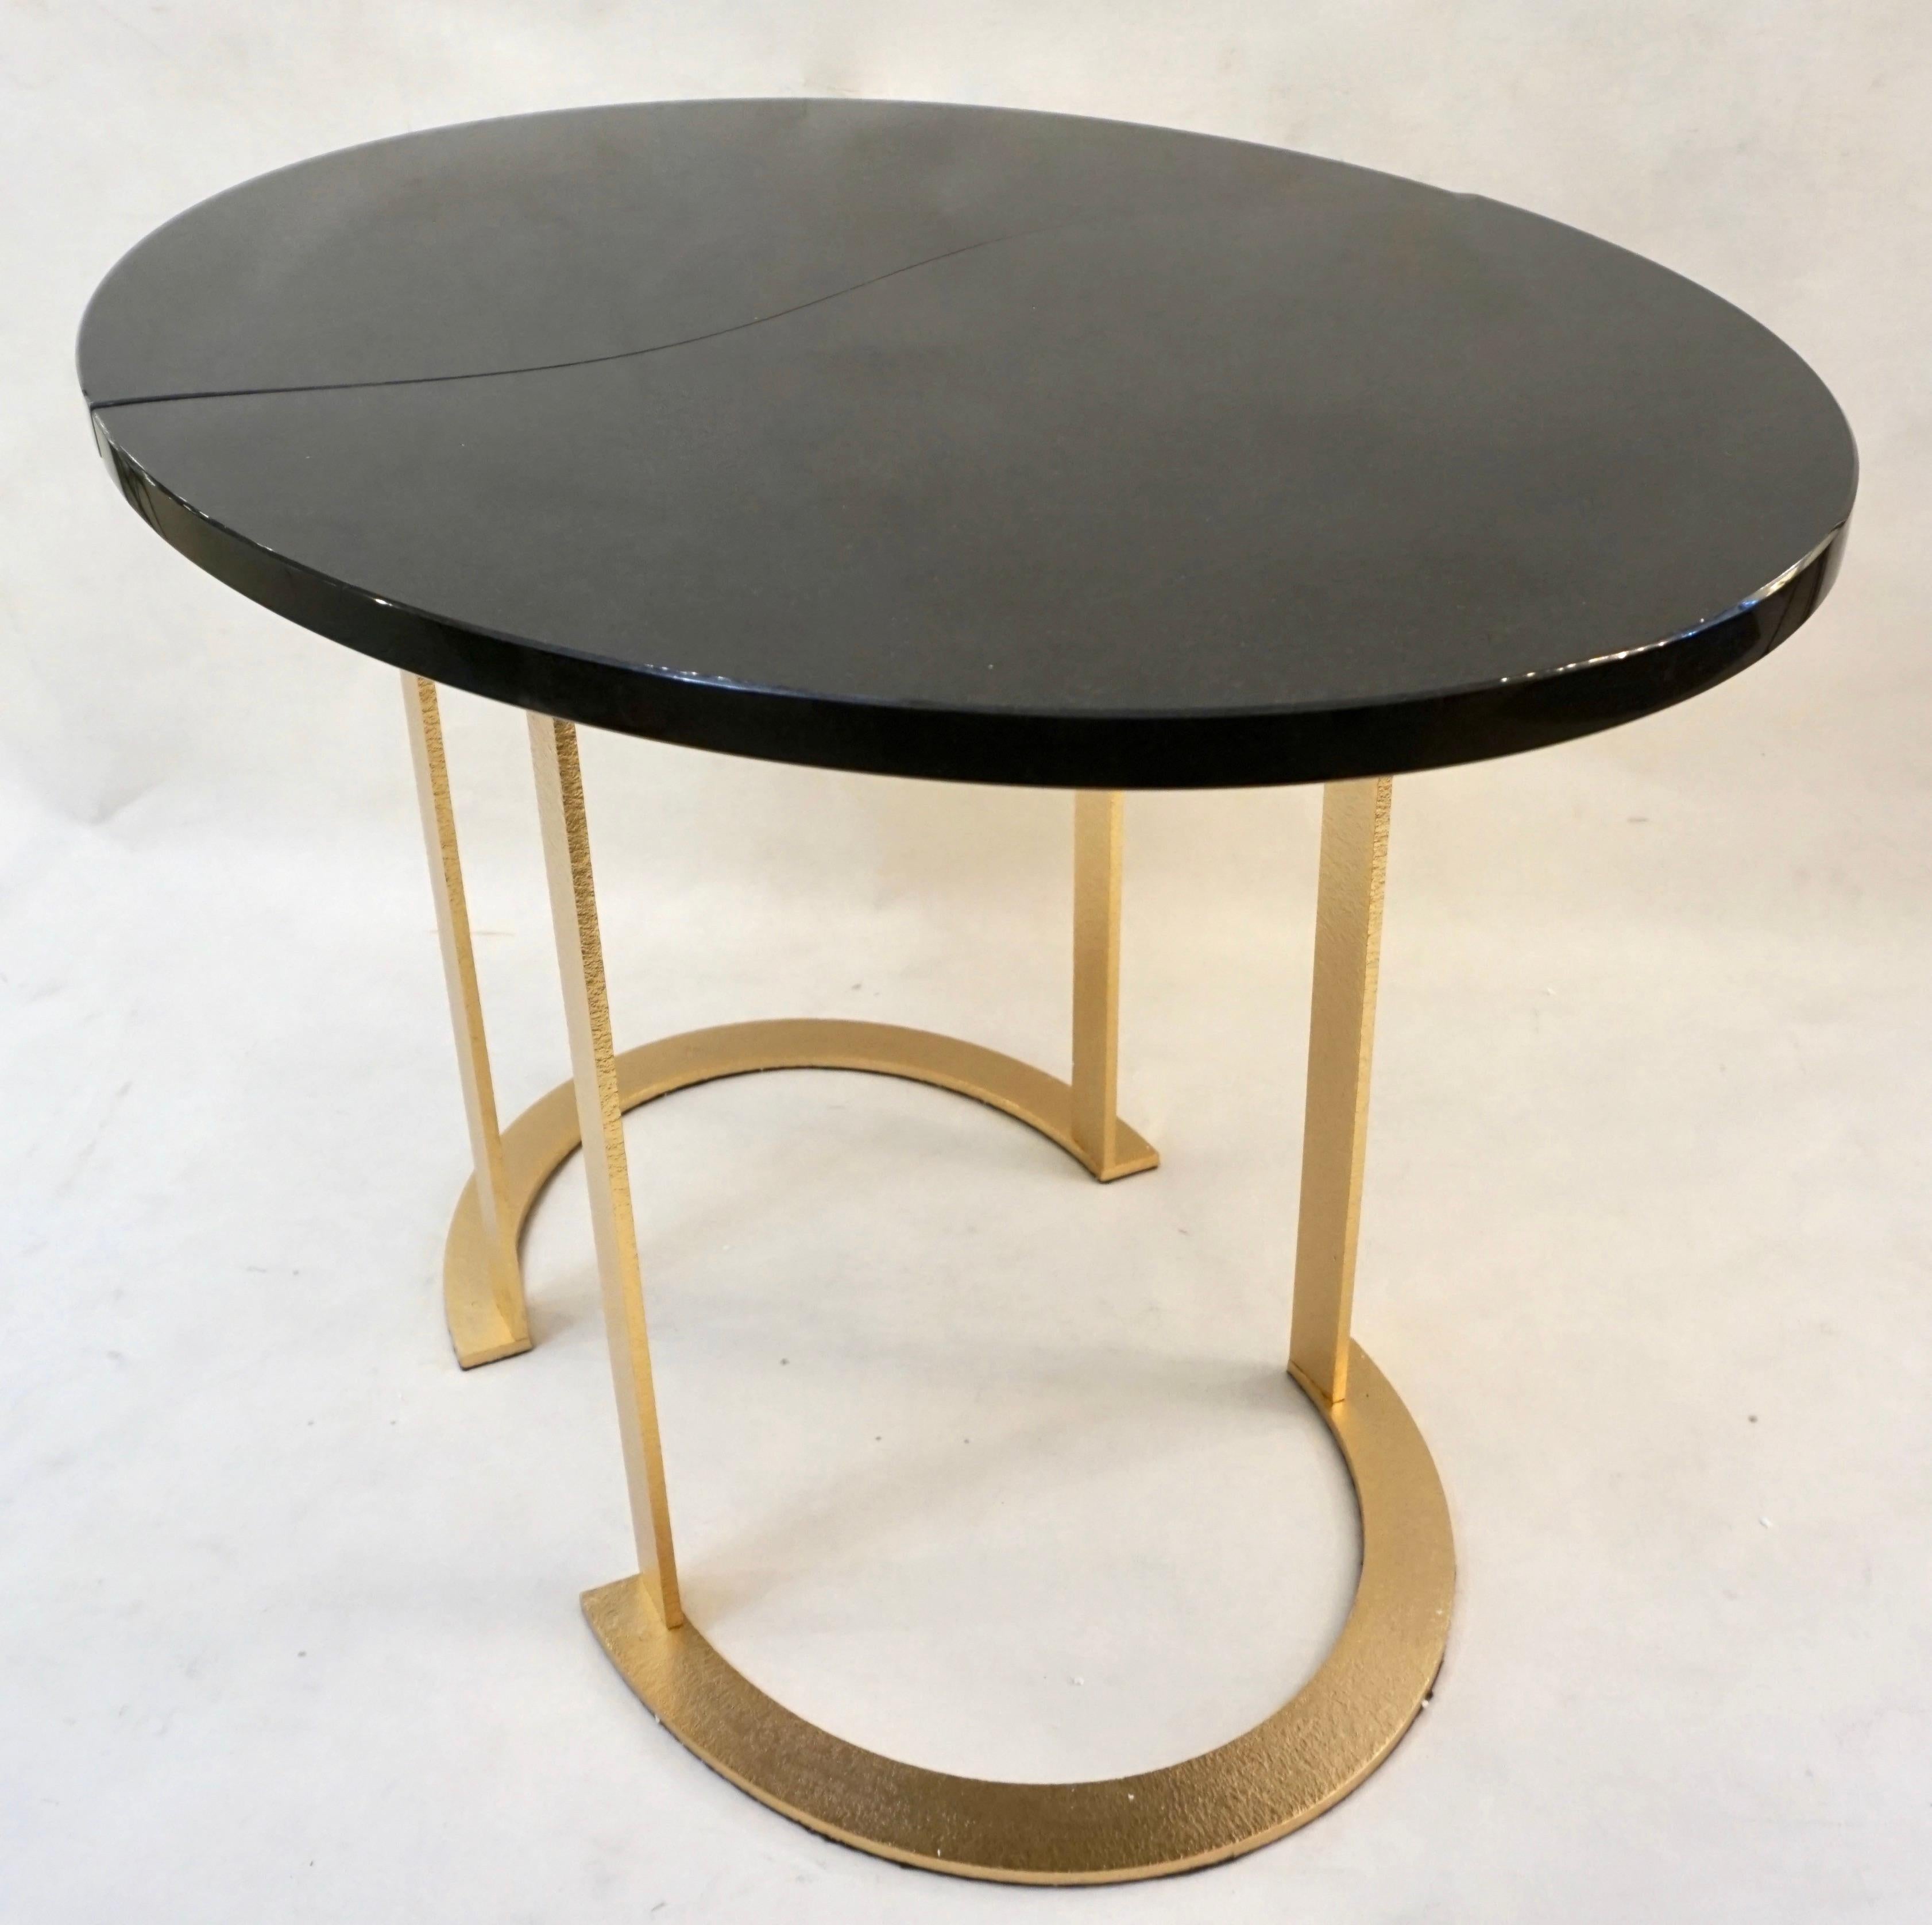 Bespoke Italian Textured Brass Black Granite Oval Side Table Doubles as a Pair 1